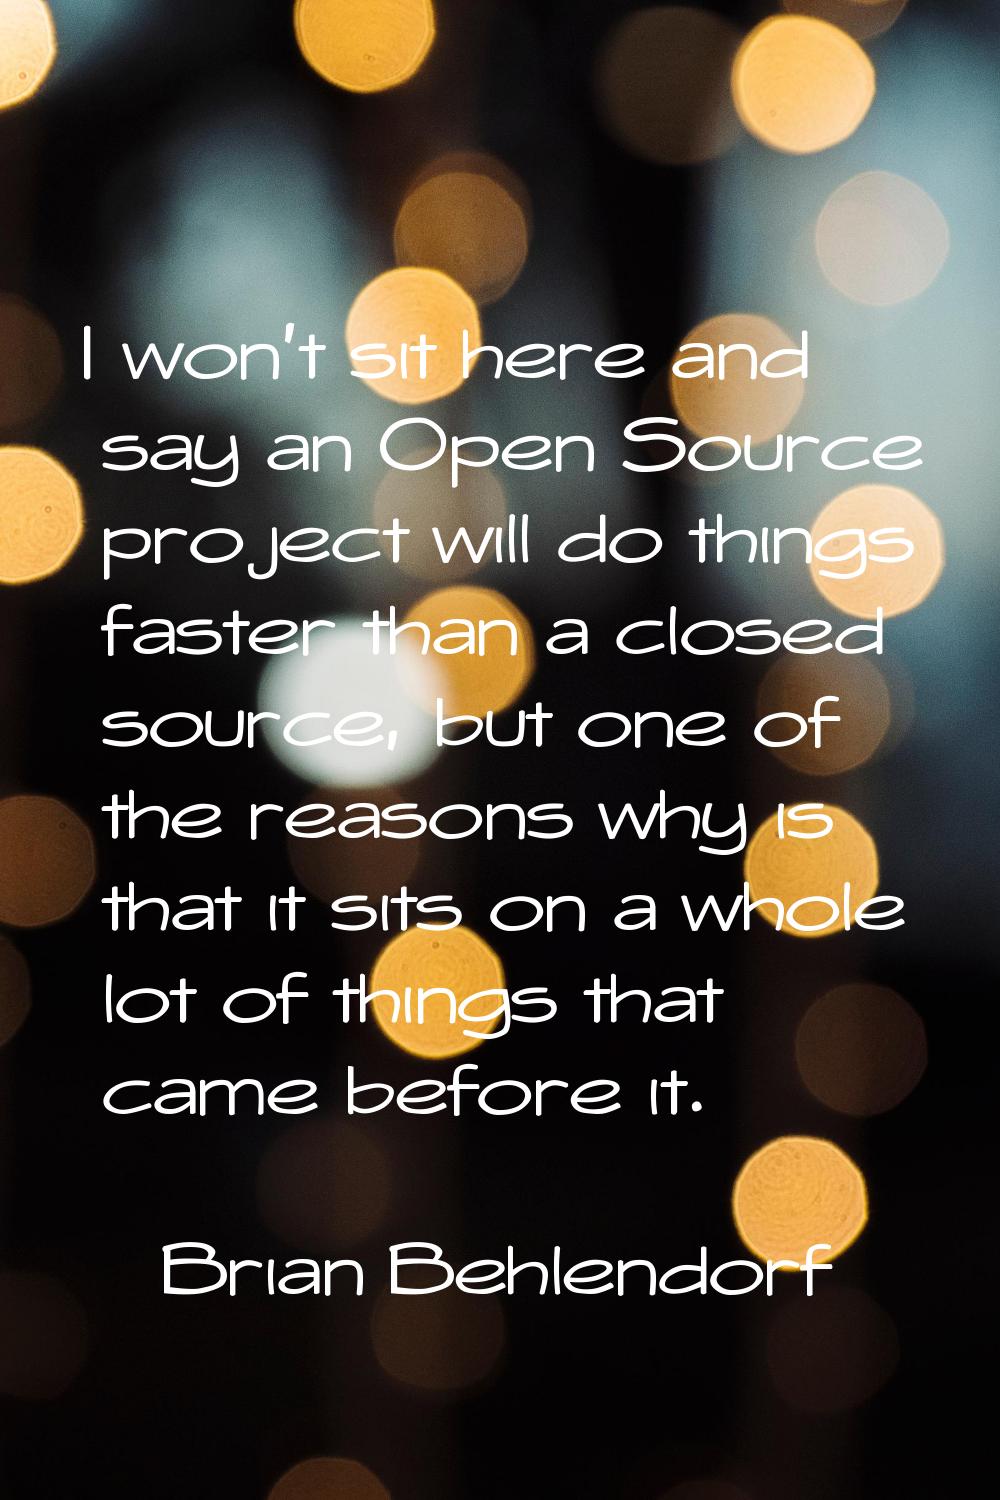 I won't sit here and say an Open Source project will do things faster than a closed source, but one